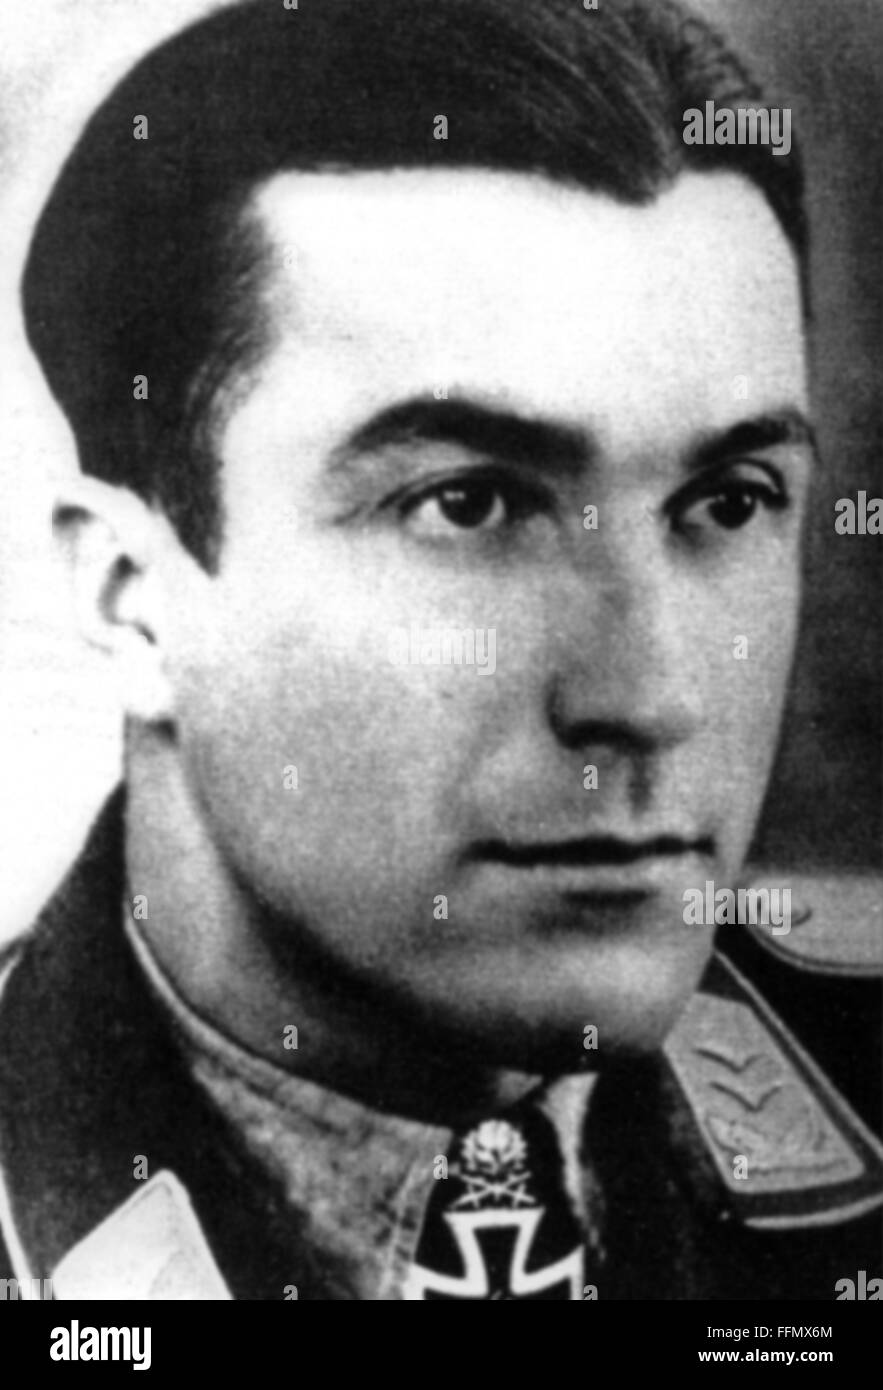 Kittel, Otto 'Bruno', 21.2.1917 - 16.2.1945, German fighter pilot, portrait, as first lieutenant in the Fighter Wing 54, November / December 1944, Stock Photo